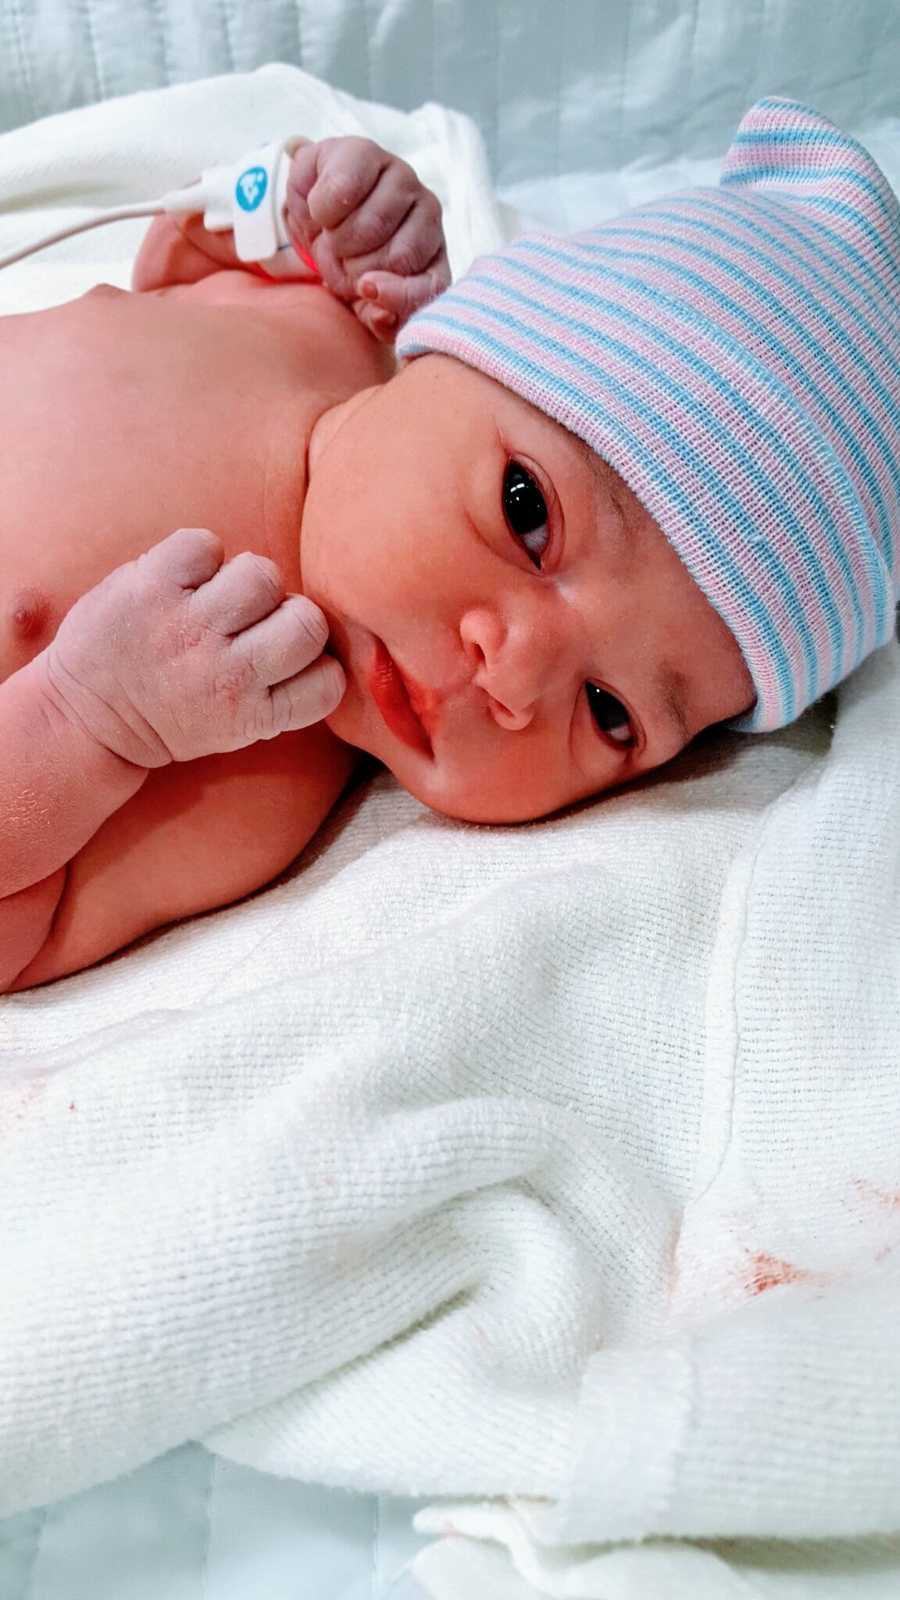 Mom takes photo of her newborn daughter, her rainbow baby, in a pink and blue striped beanie